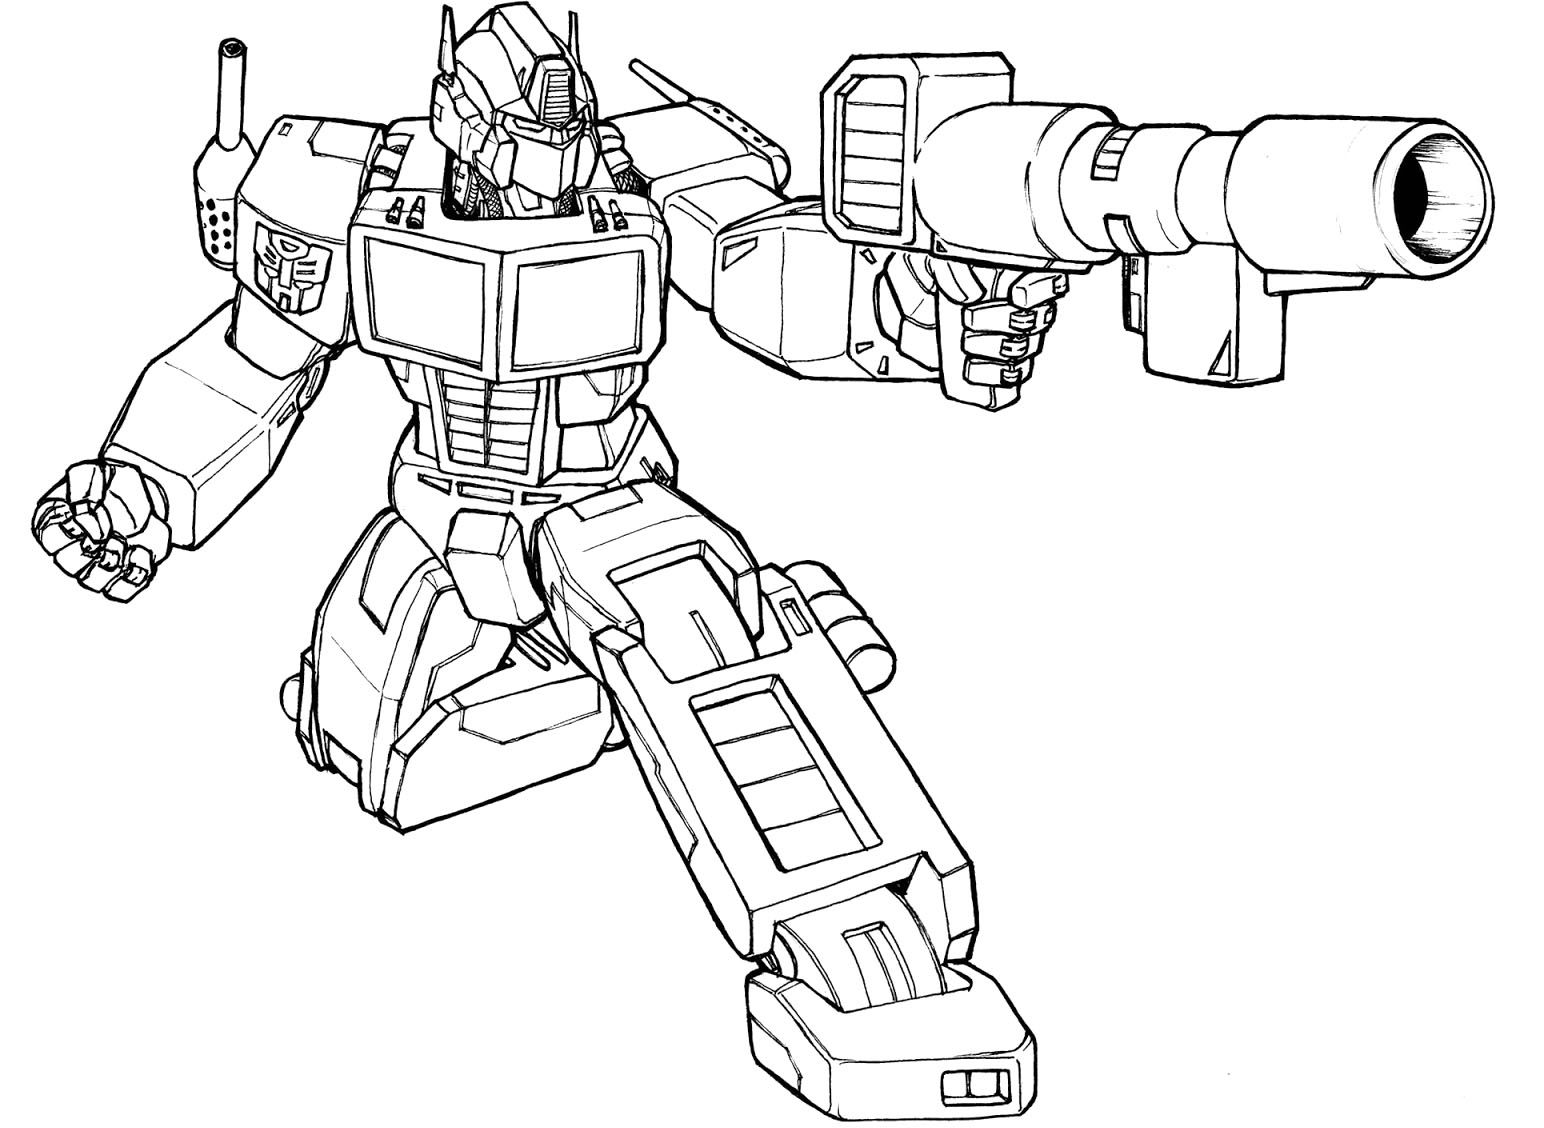 Bumble Bee Transformer Coloring Page - Coloring Pages for Kids and ...